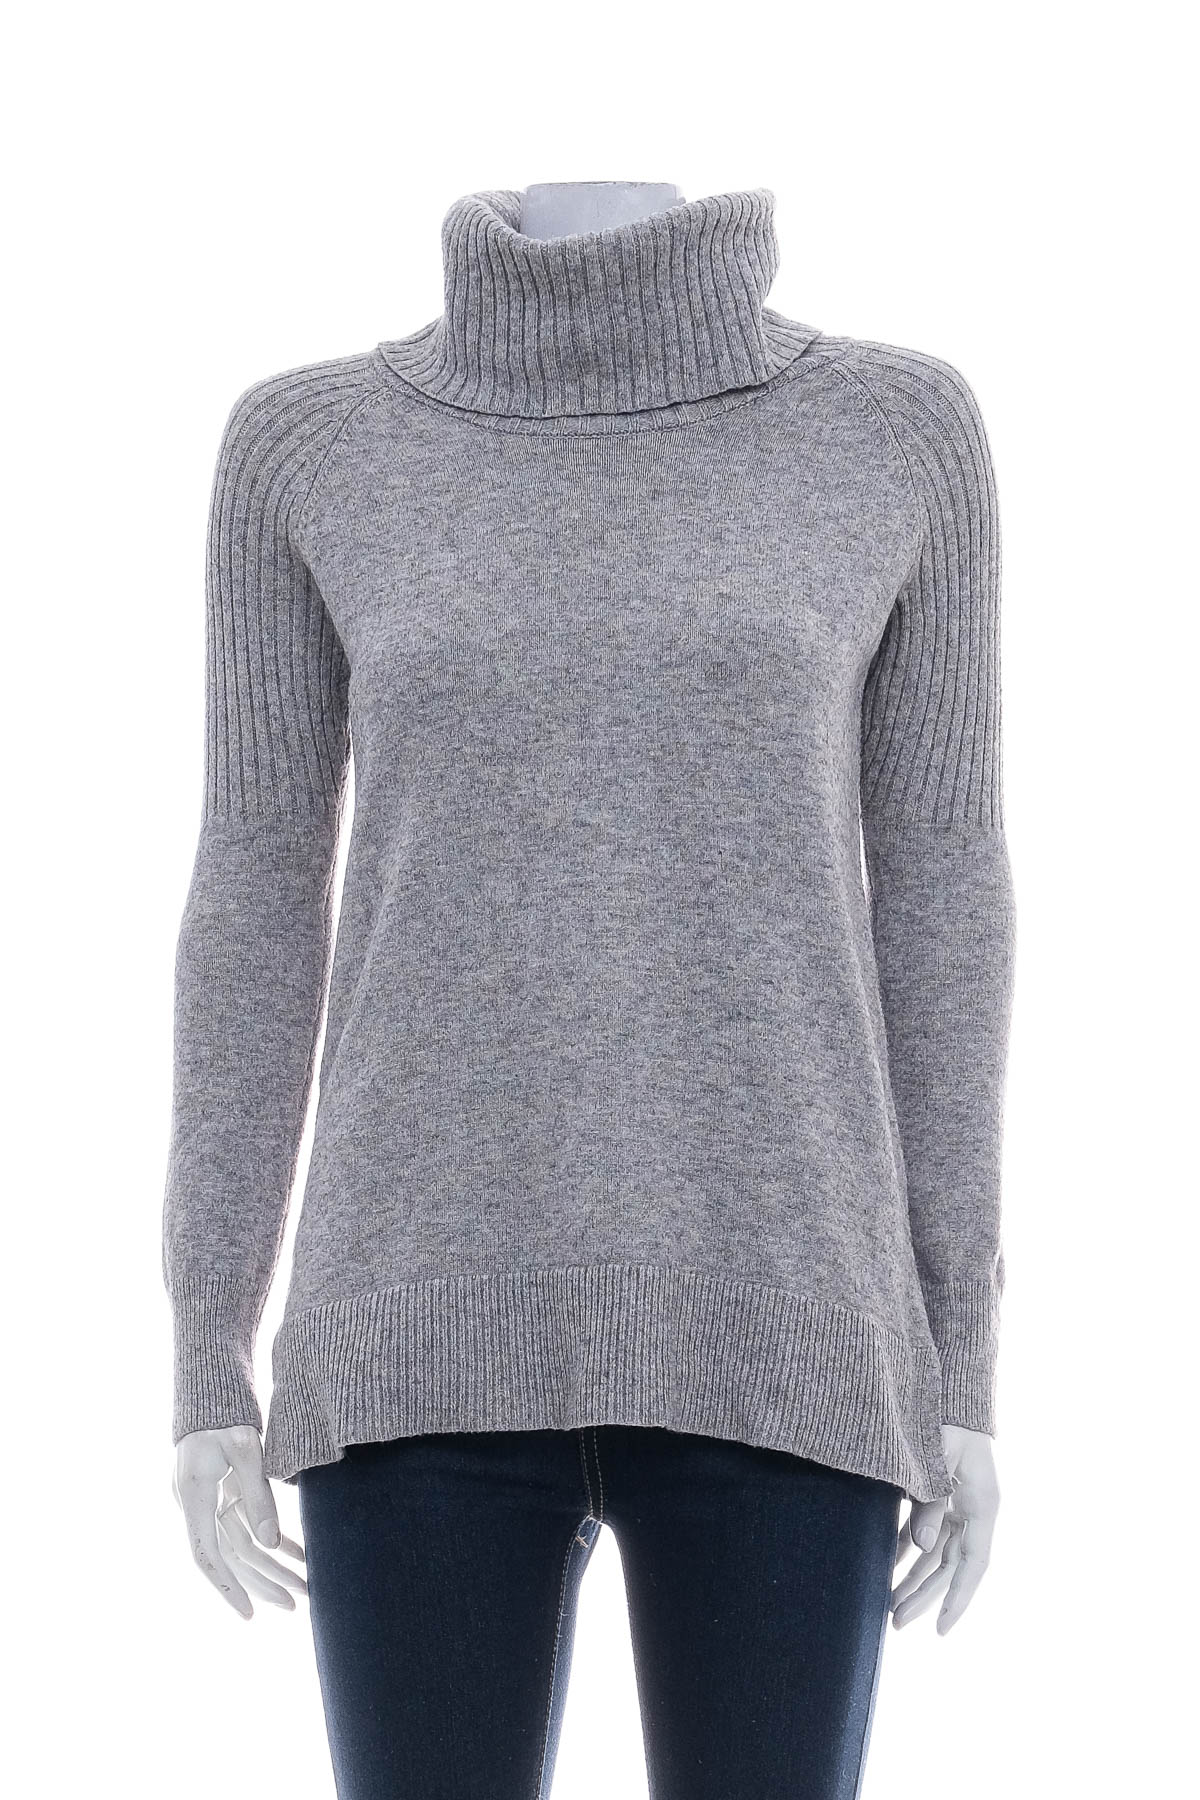 Women's sweater - TIME and TRU - 0